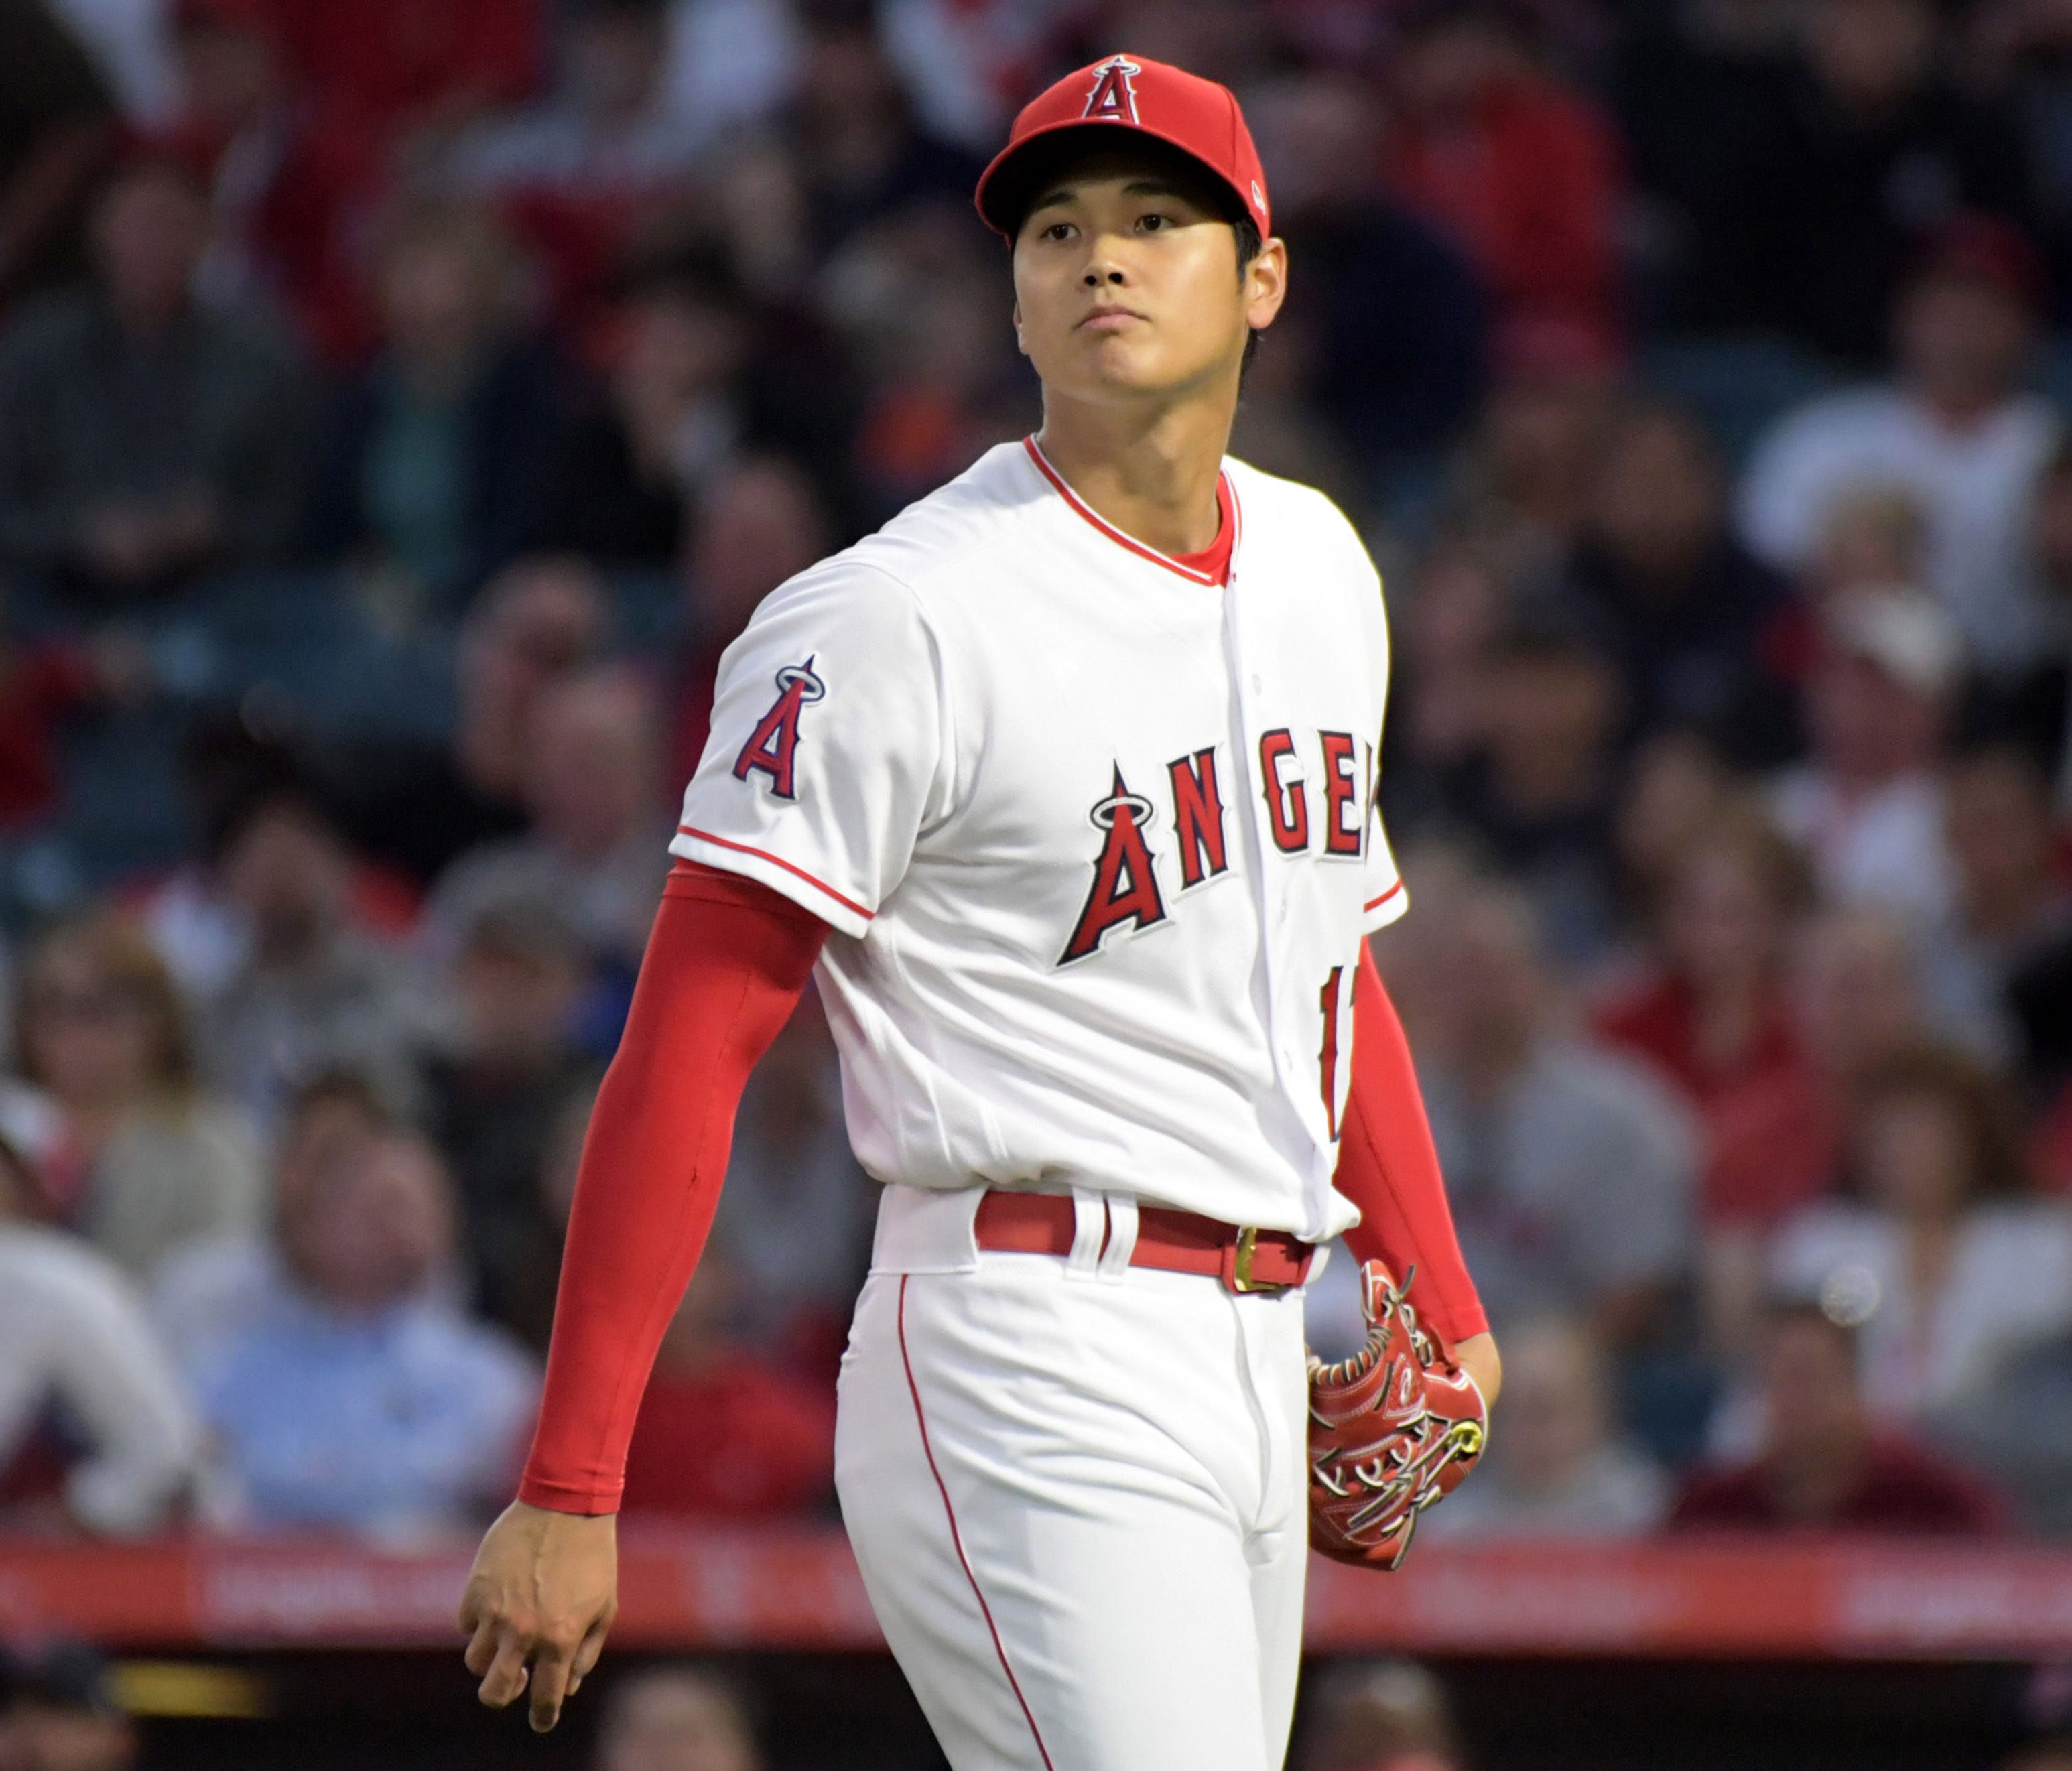 Shohei Ohtani lasted just two innings and gave up three runs against the Red Sox.